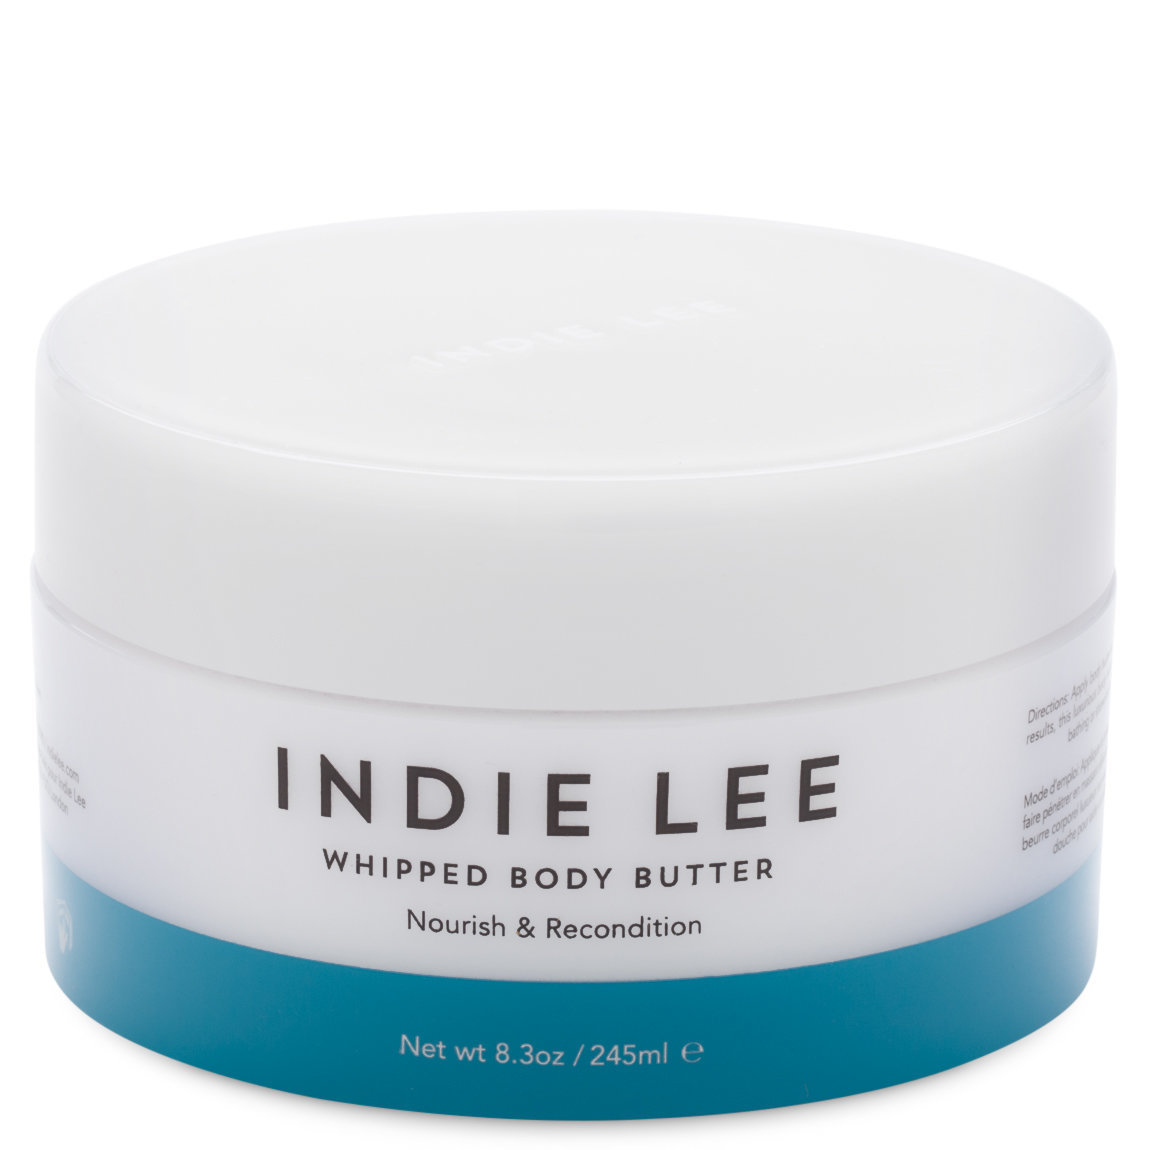 Инди ли. Скраб BL Whipped body Scrub Coconut cloud. Body Butter Shea Coconut. Indie Lee купить. Reviving body Scrub Polishes.